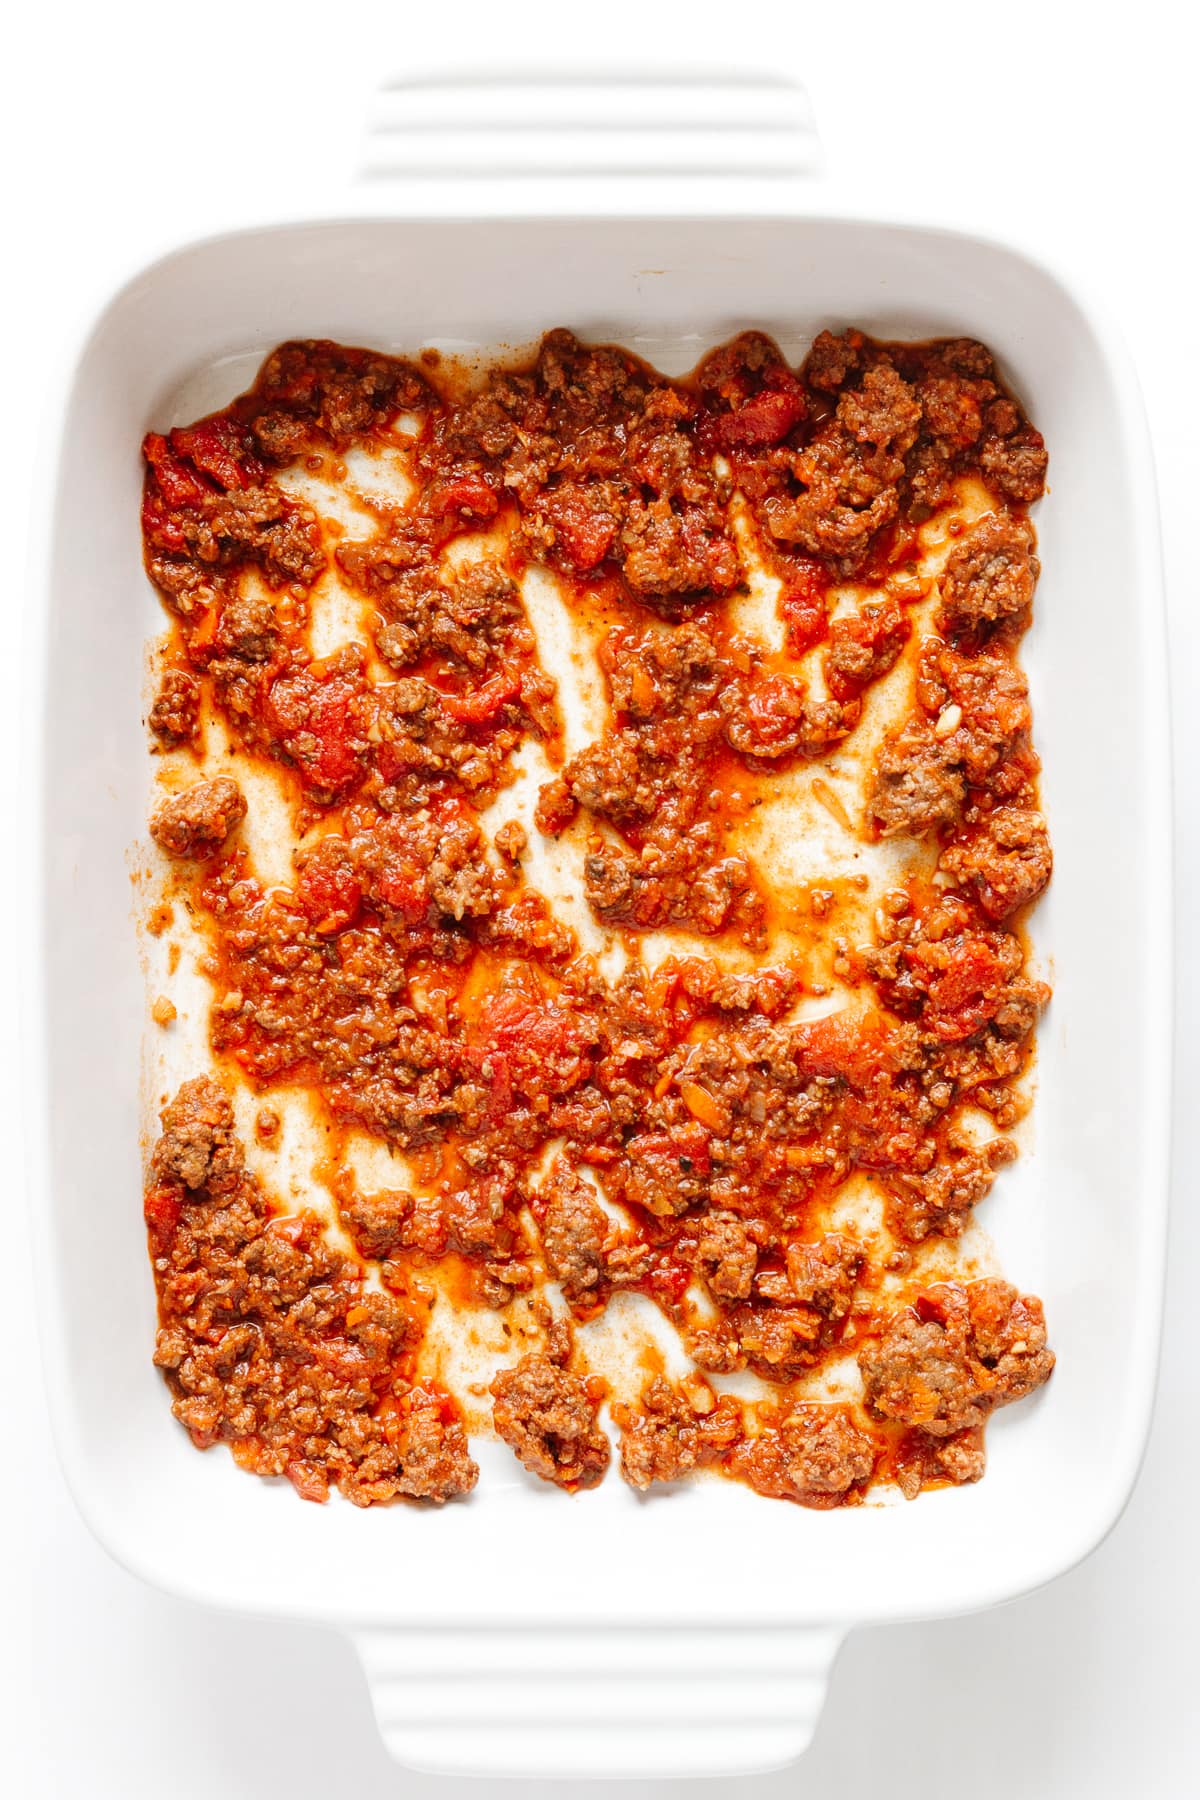 Thin layer of Bolognese Sauce spread on the bottom of a white casserole dish.